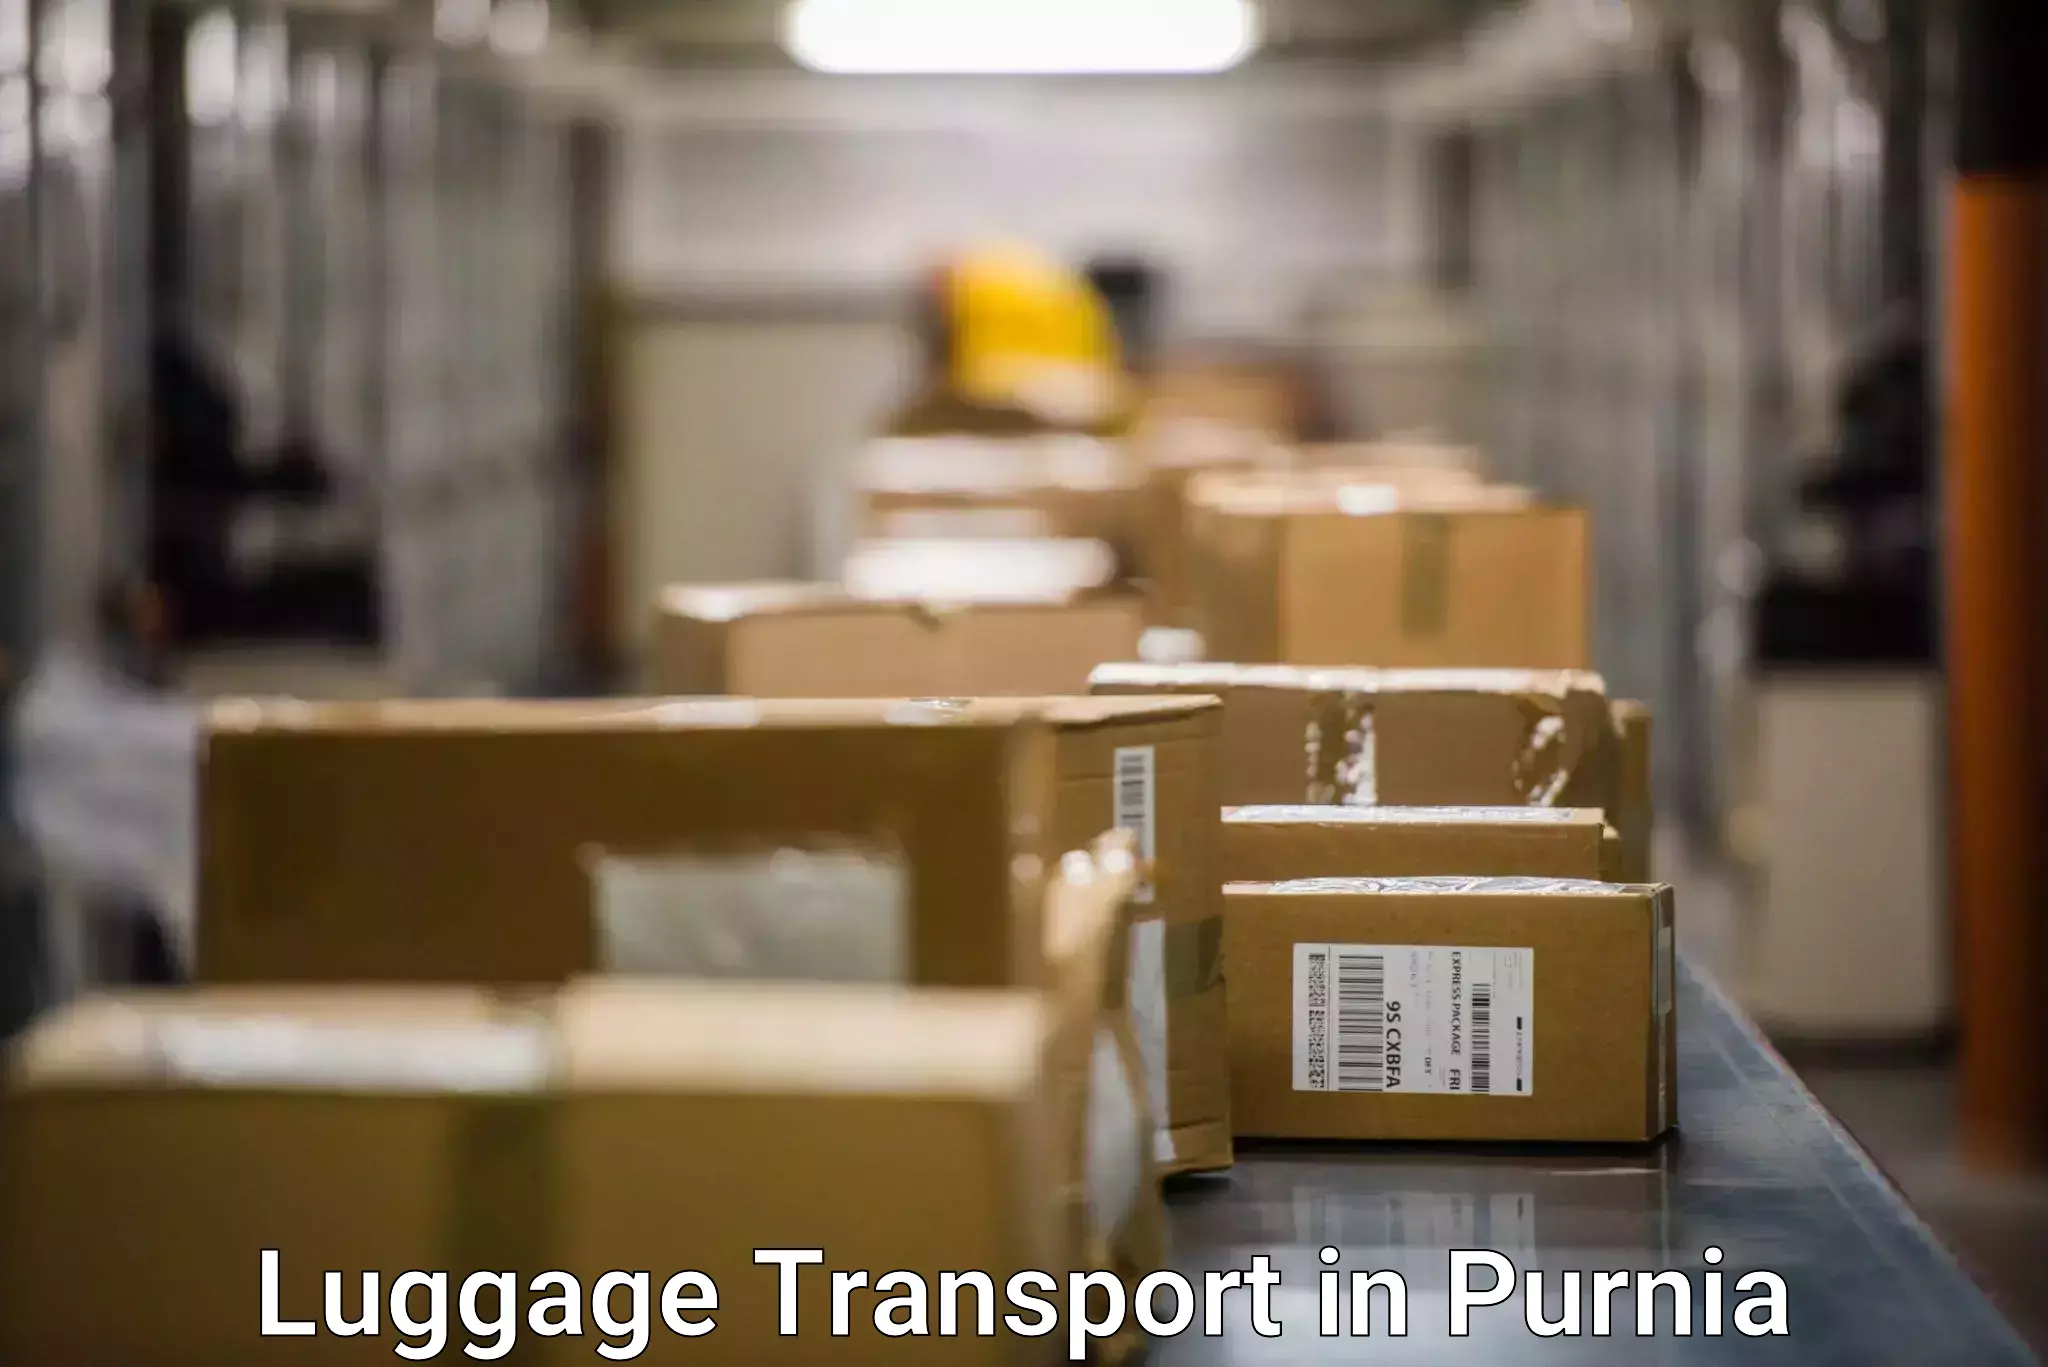 Baggage shipping service in Purnia